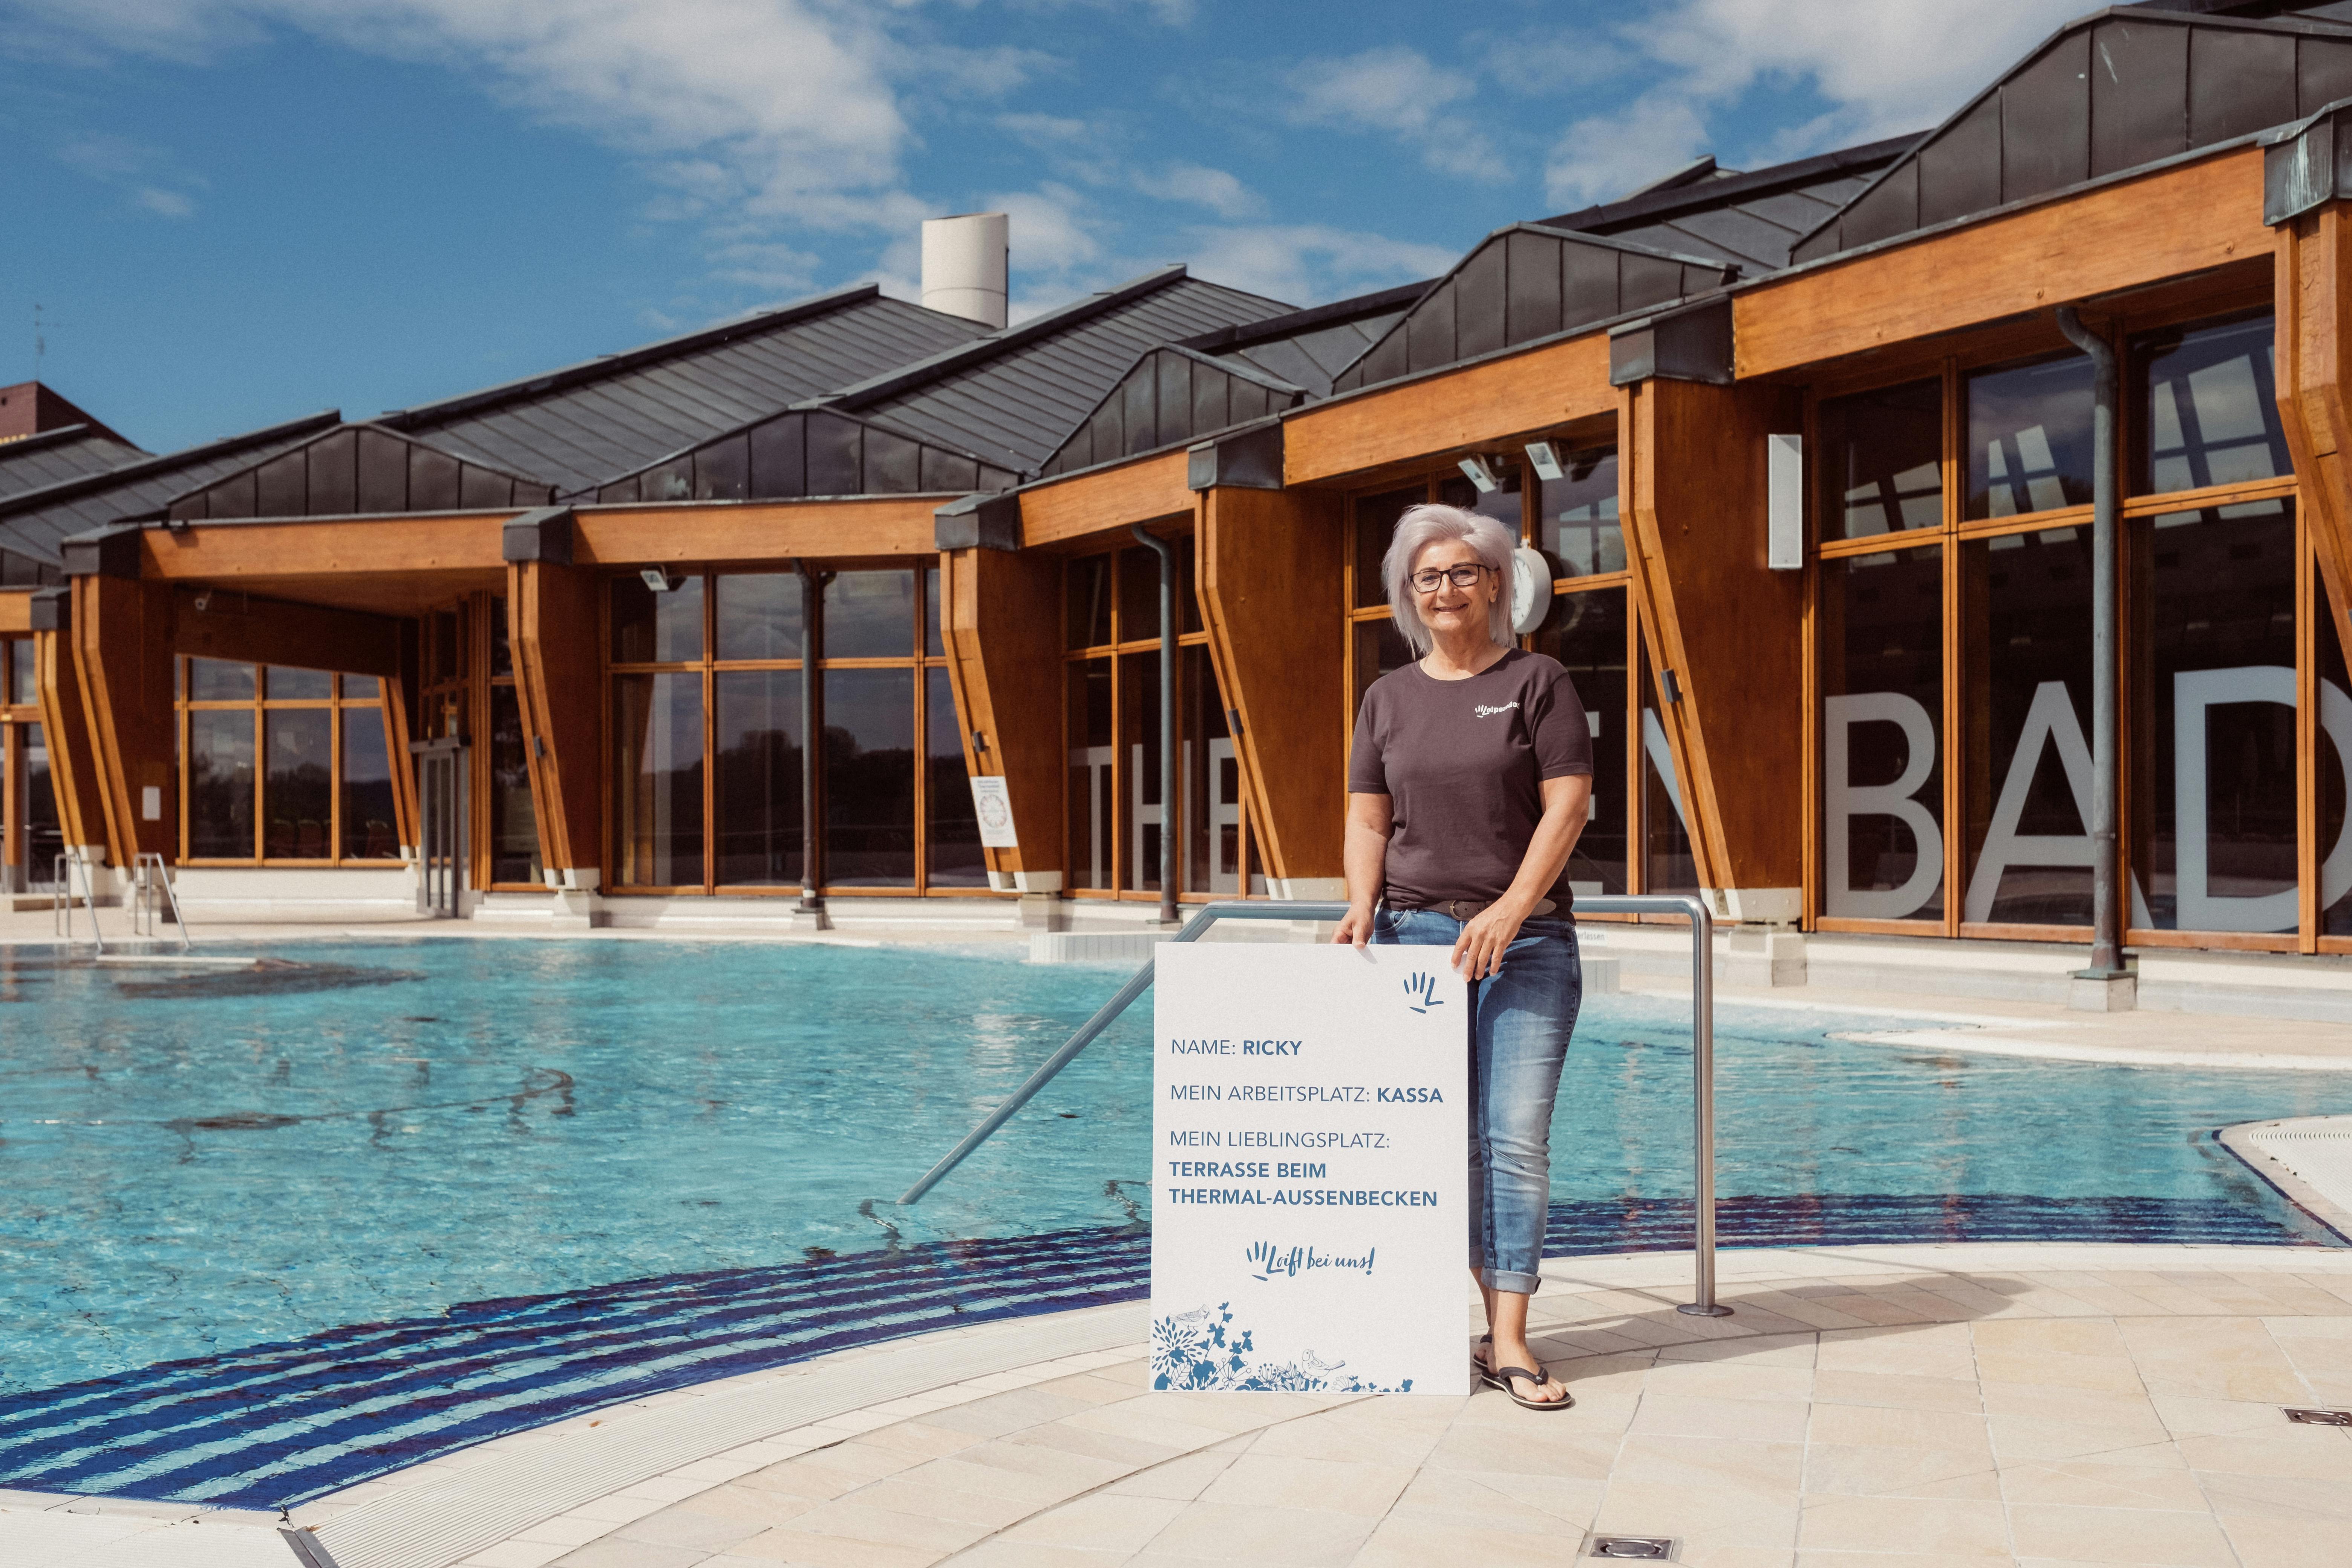 Our team member Ricky shows her favorite place in the thermal resort Loipersdorf.